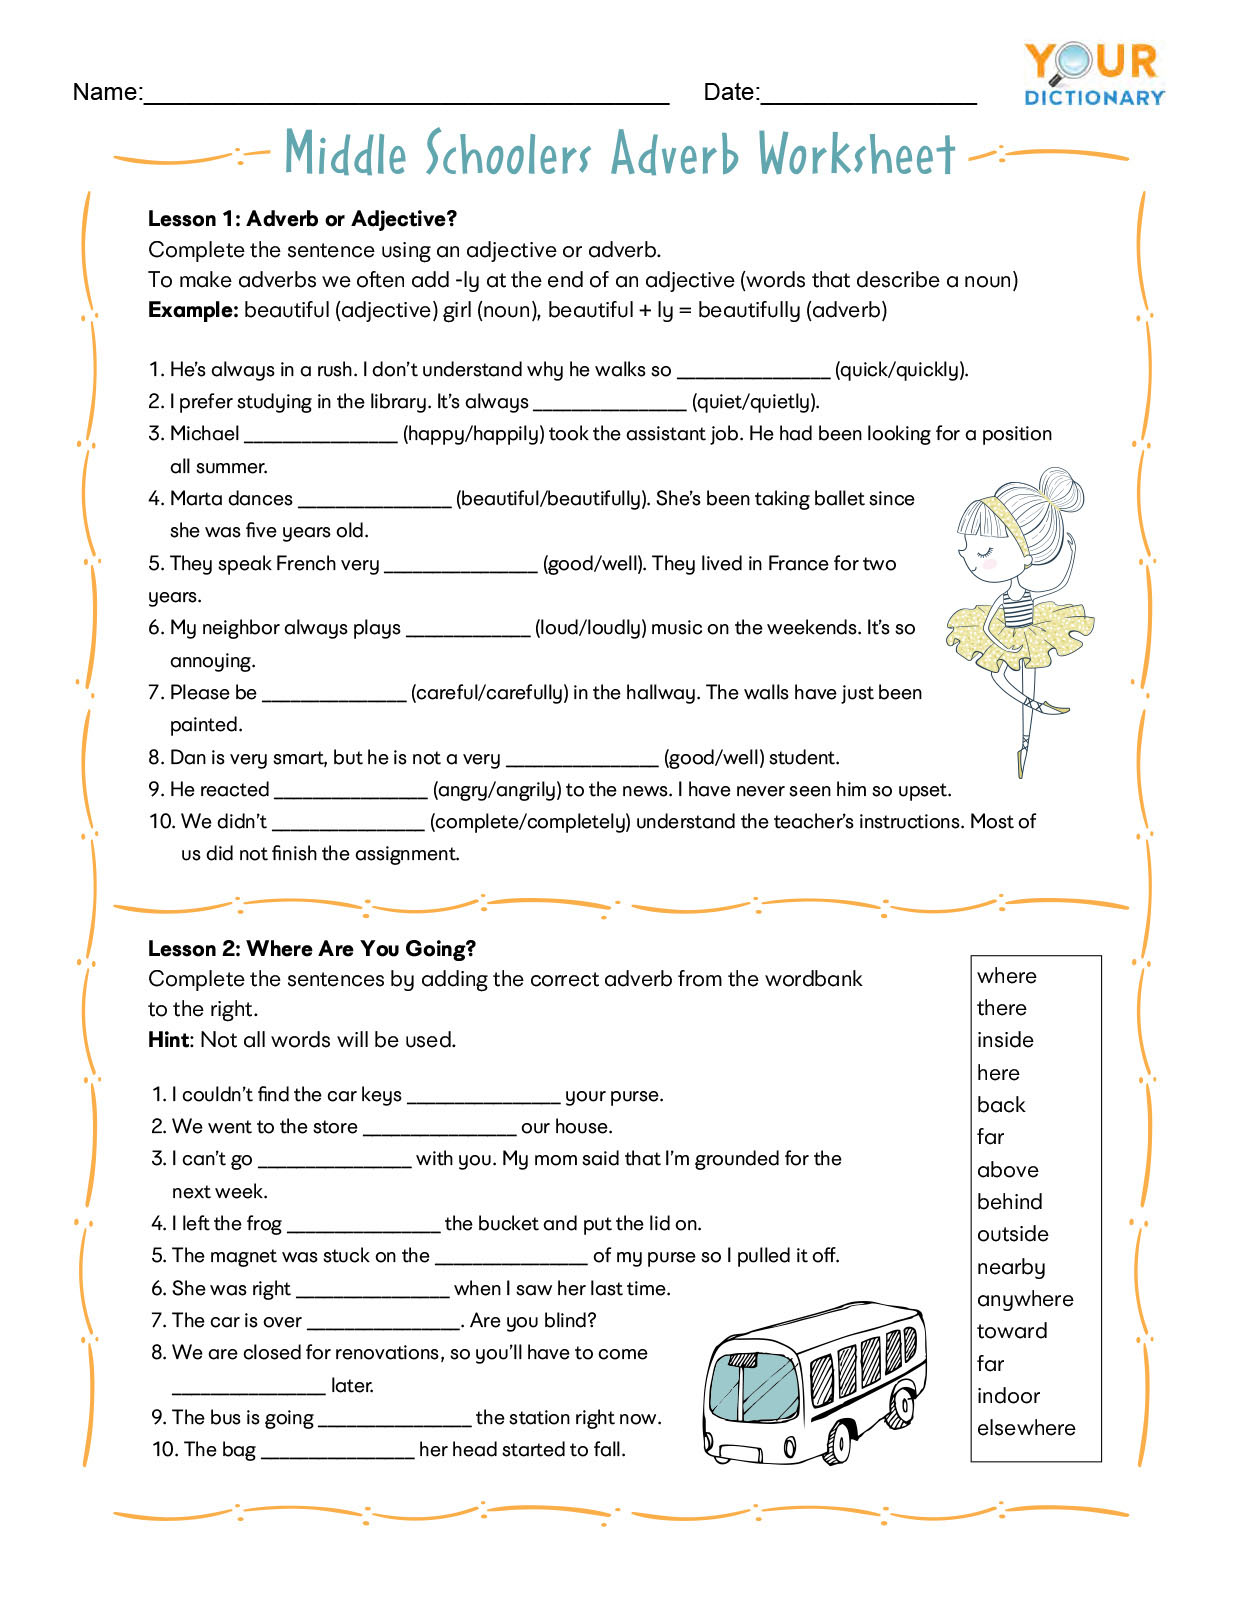 Adjectives And Adverbs With Magical Horses Worksheet Answers Adjective Or Adverb 2nd Or 3rd 